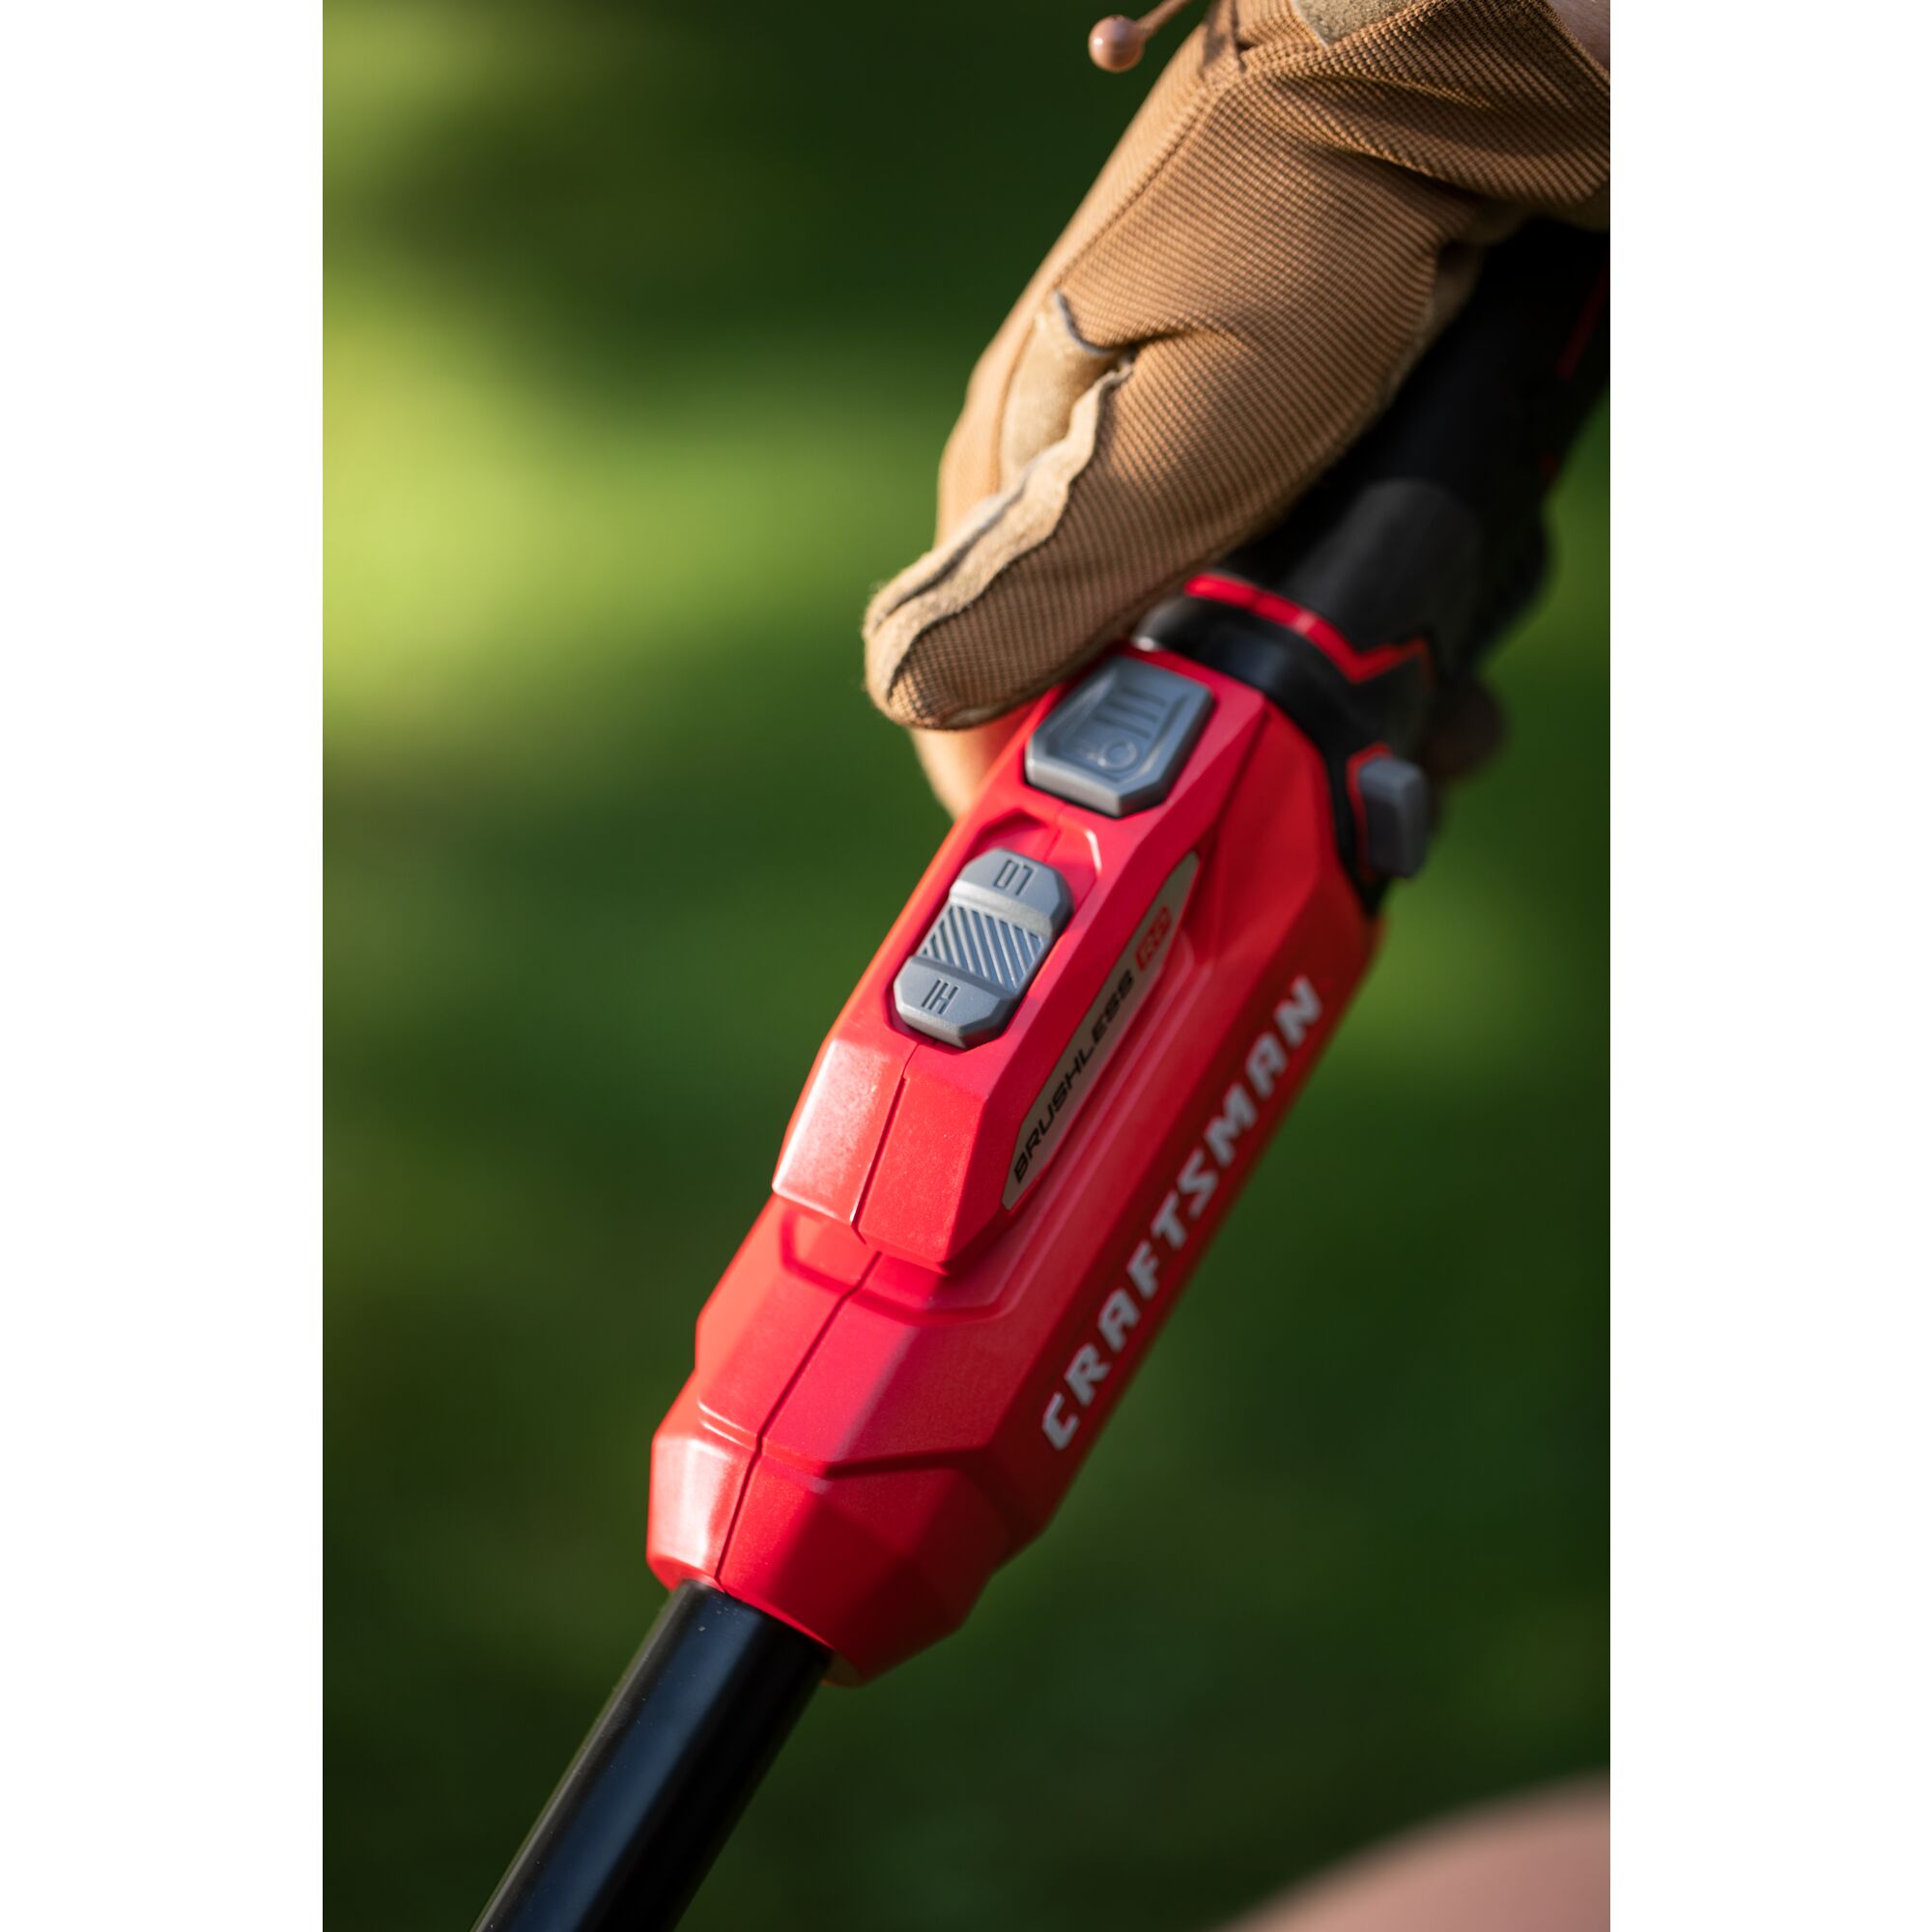 CRAFTSMAN V20 BRUSHLES PR String Trimmer zommed in pushing the push button feed
